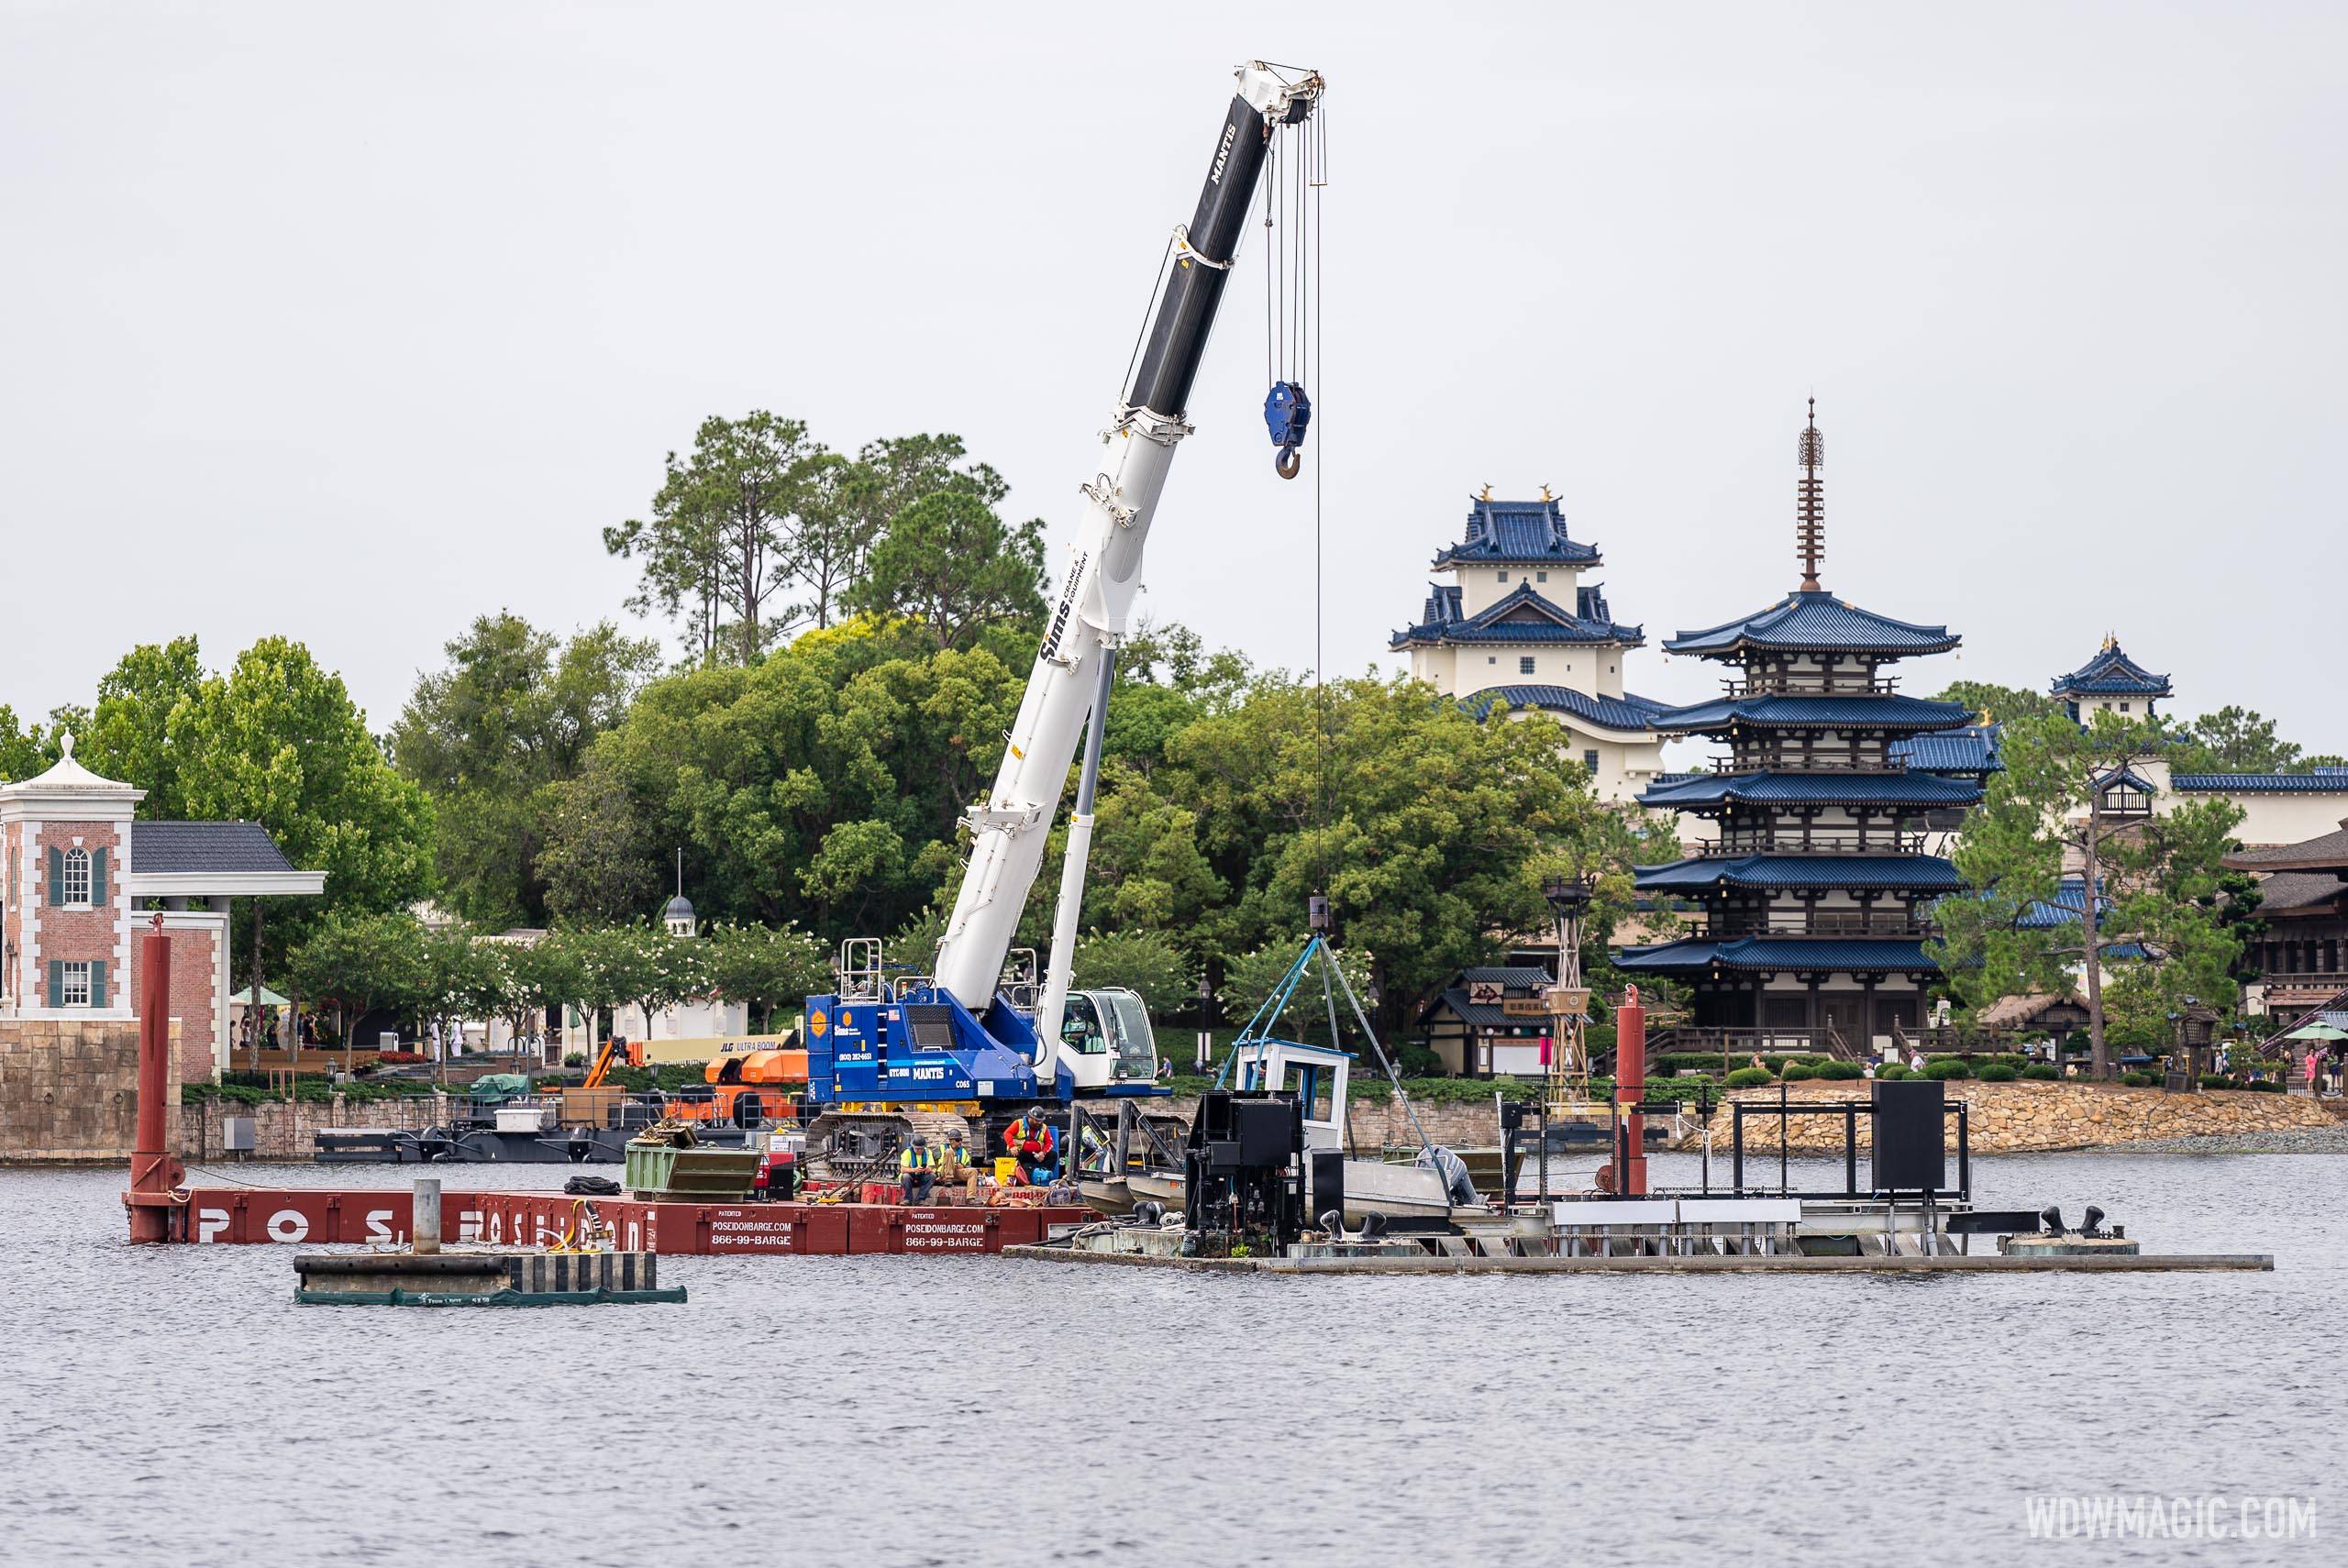 Crane begins work in the center of World Showcase Lagoon on EPCOT's new nighttime spectacular